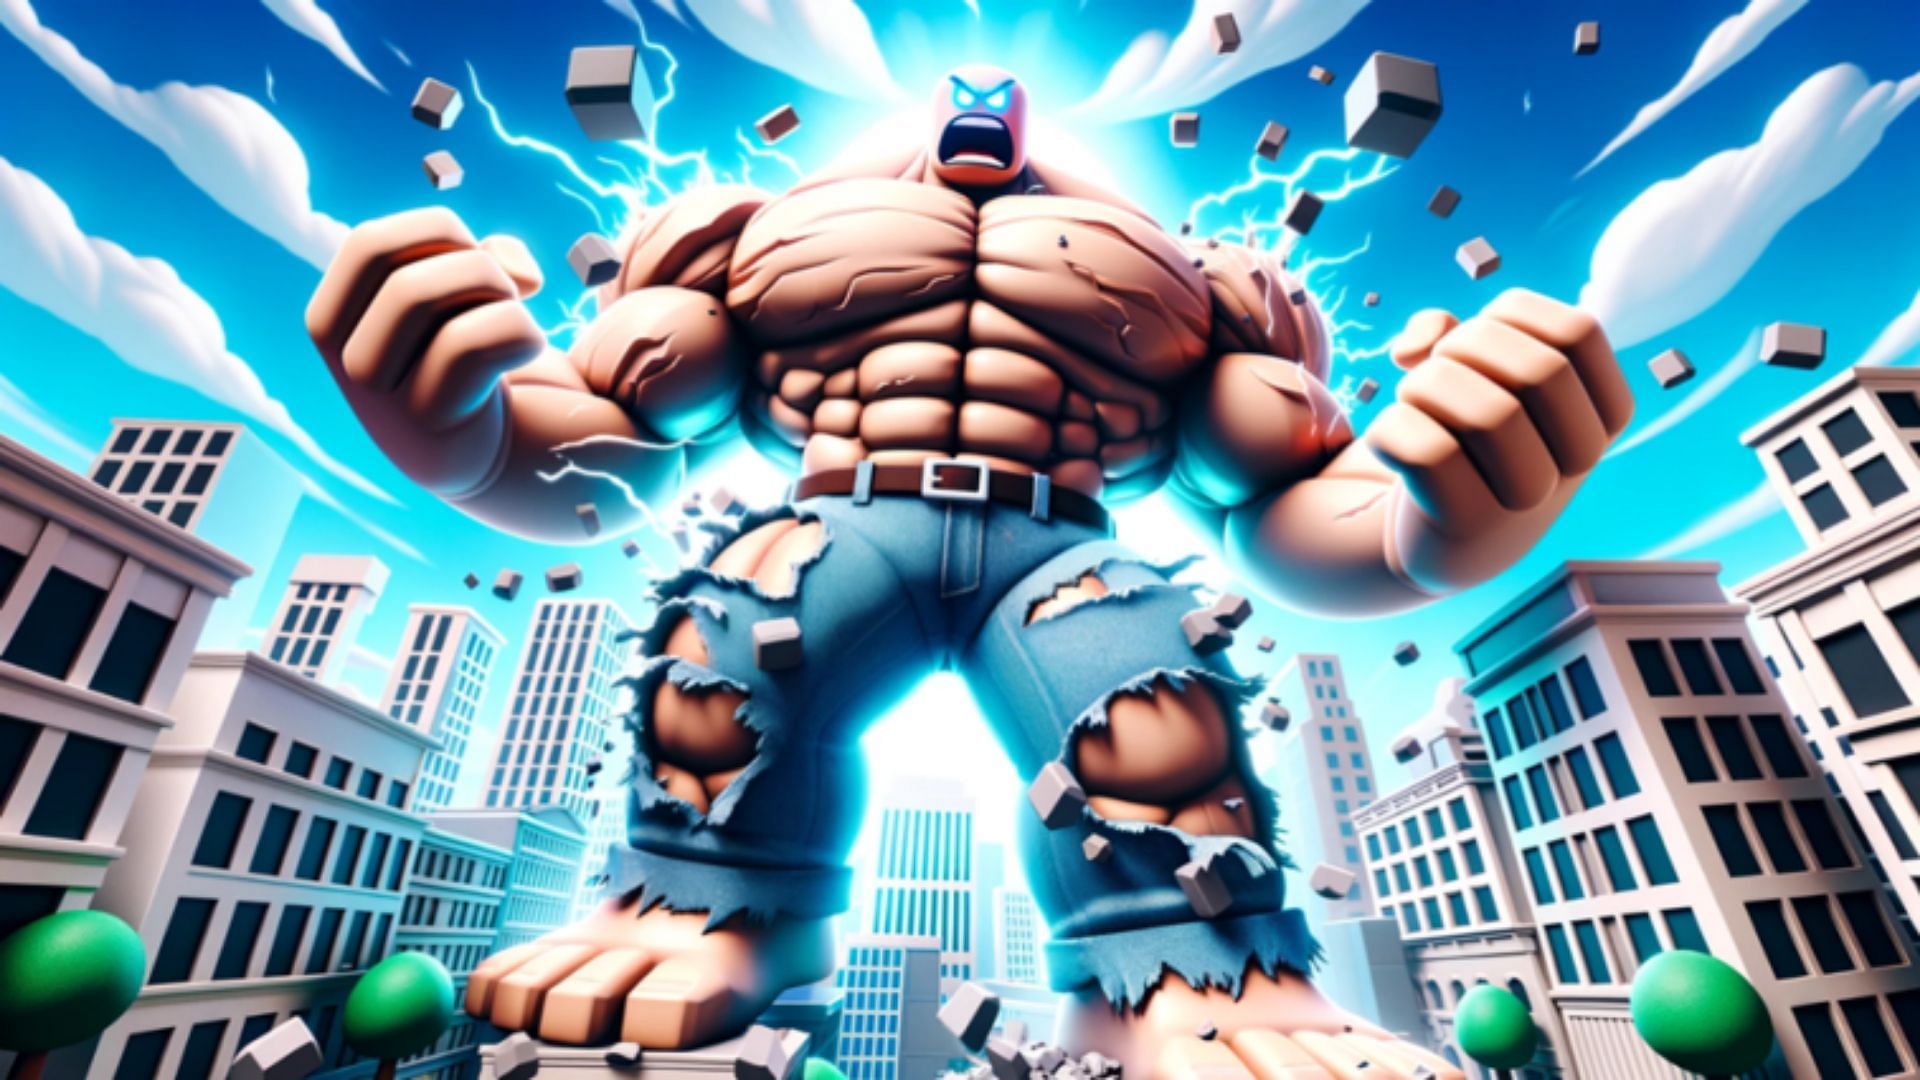 Codes for Strongest Man Simulator and their importance (Image via Roblox)